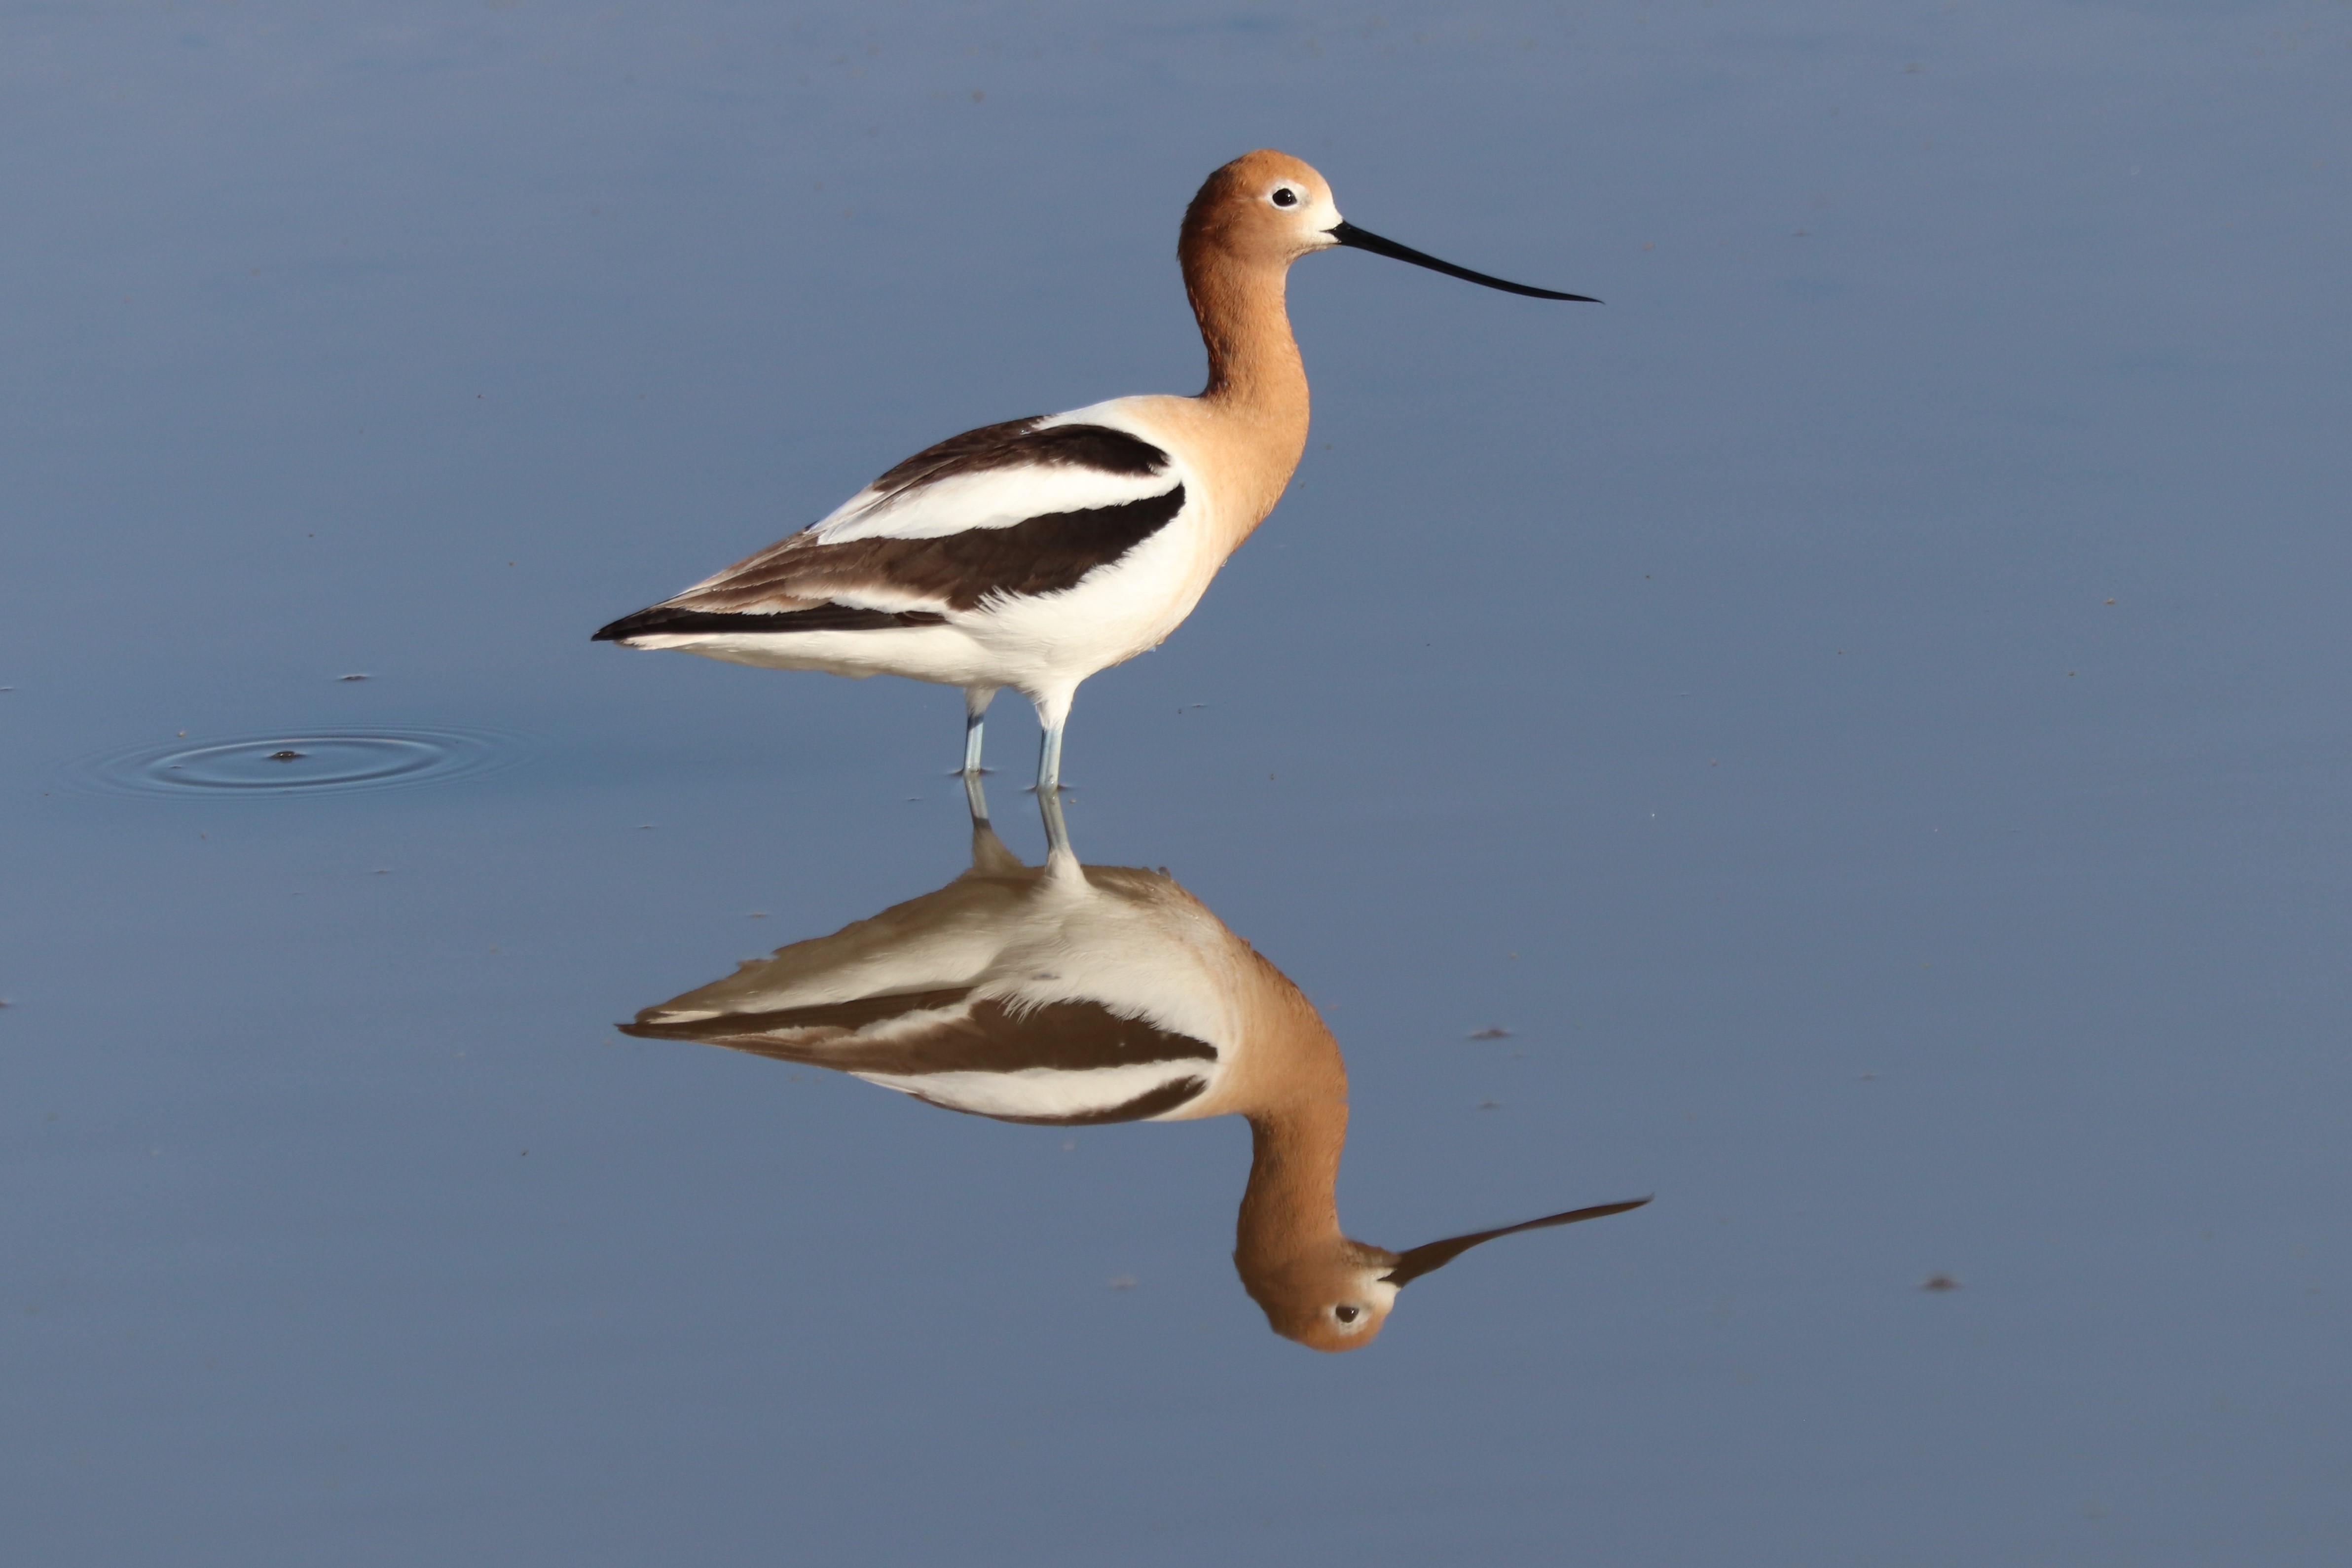 Photo by Buddy Walker  |  Avocet In Breeding Condition, note Rusty Colored Head , "Reflections Series"